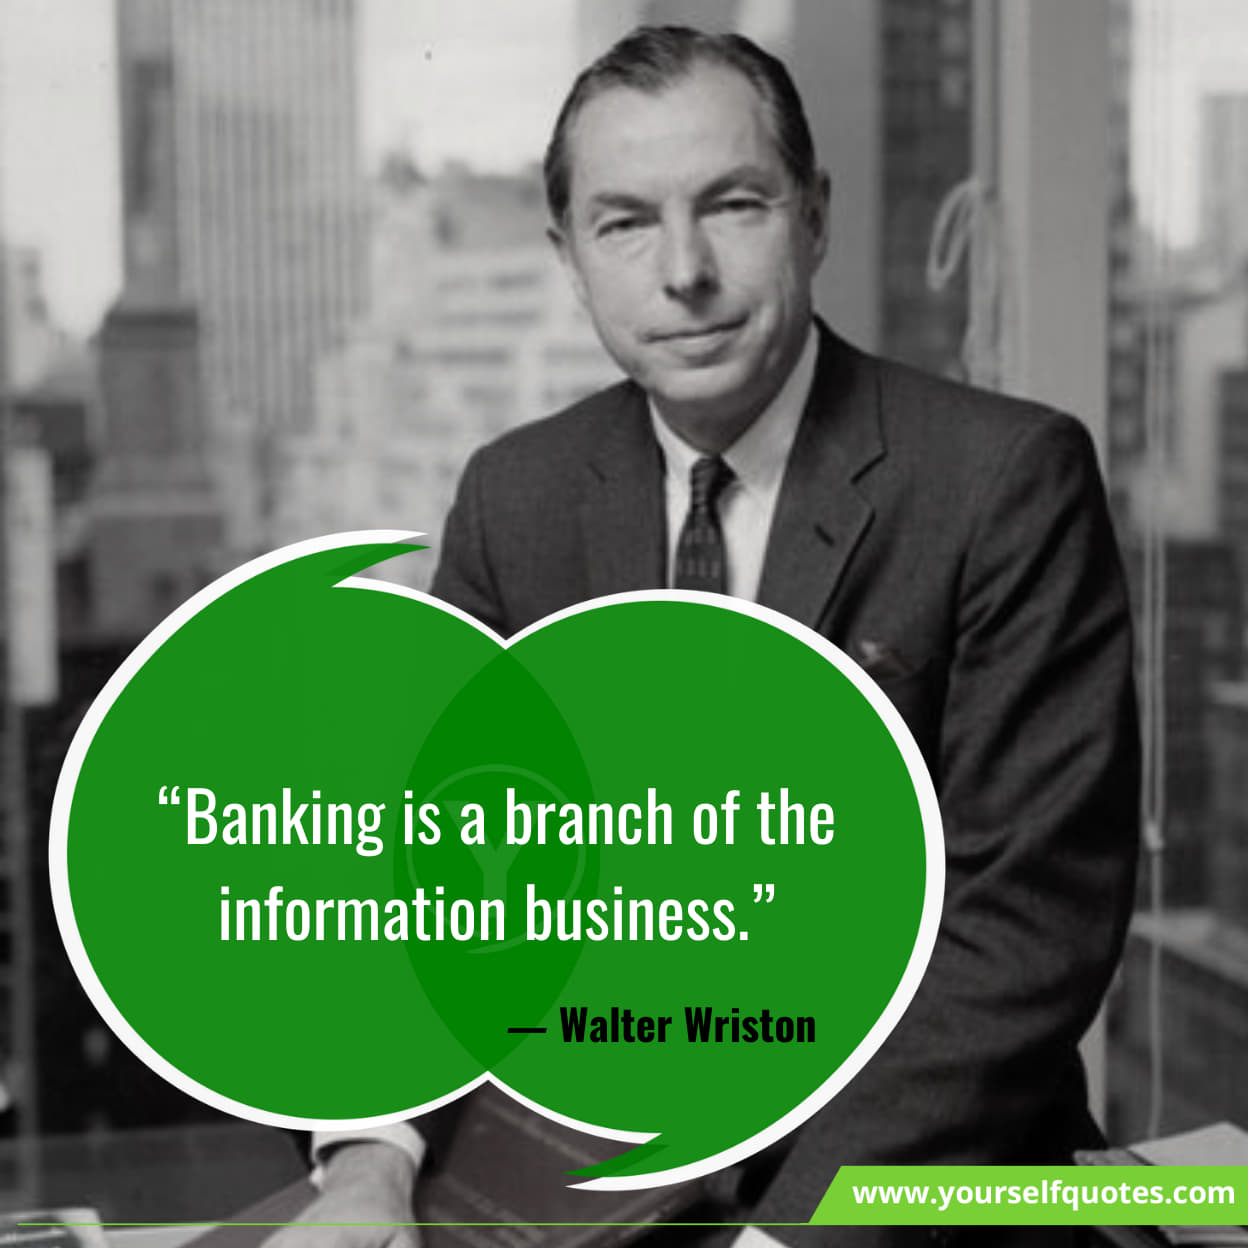 Famous Quotes On Banking System